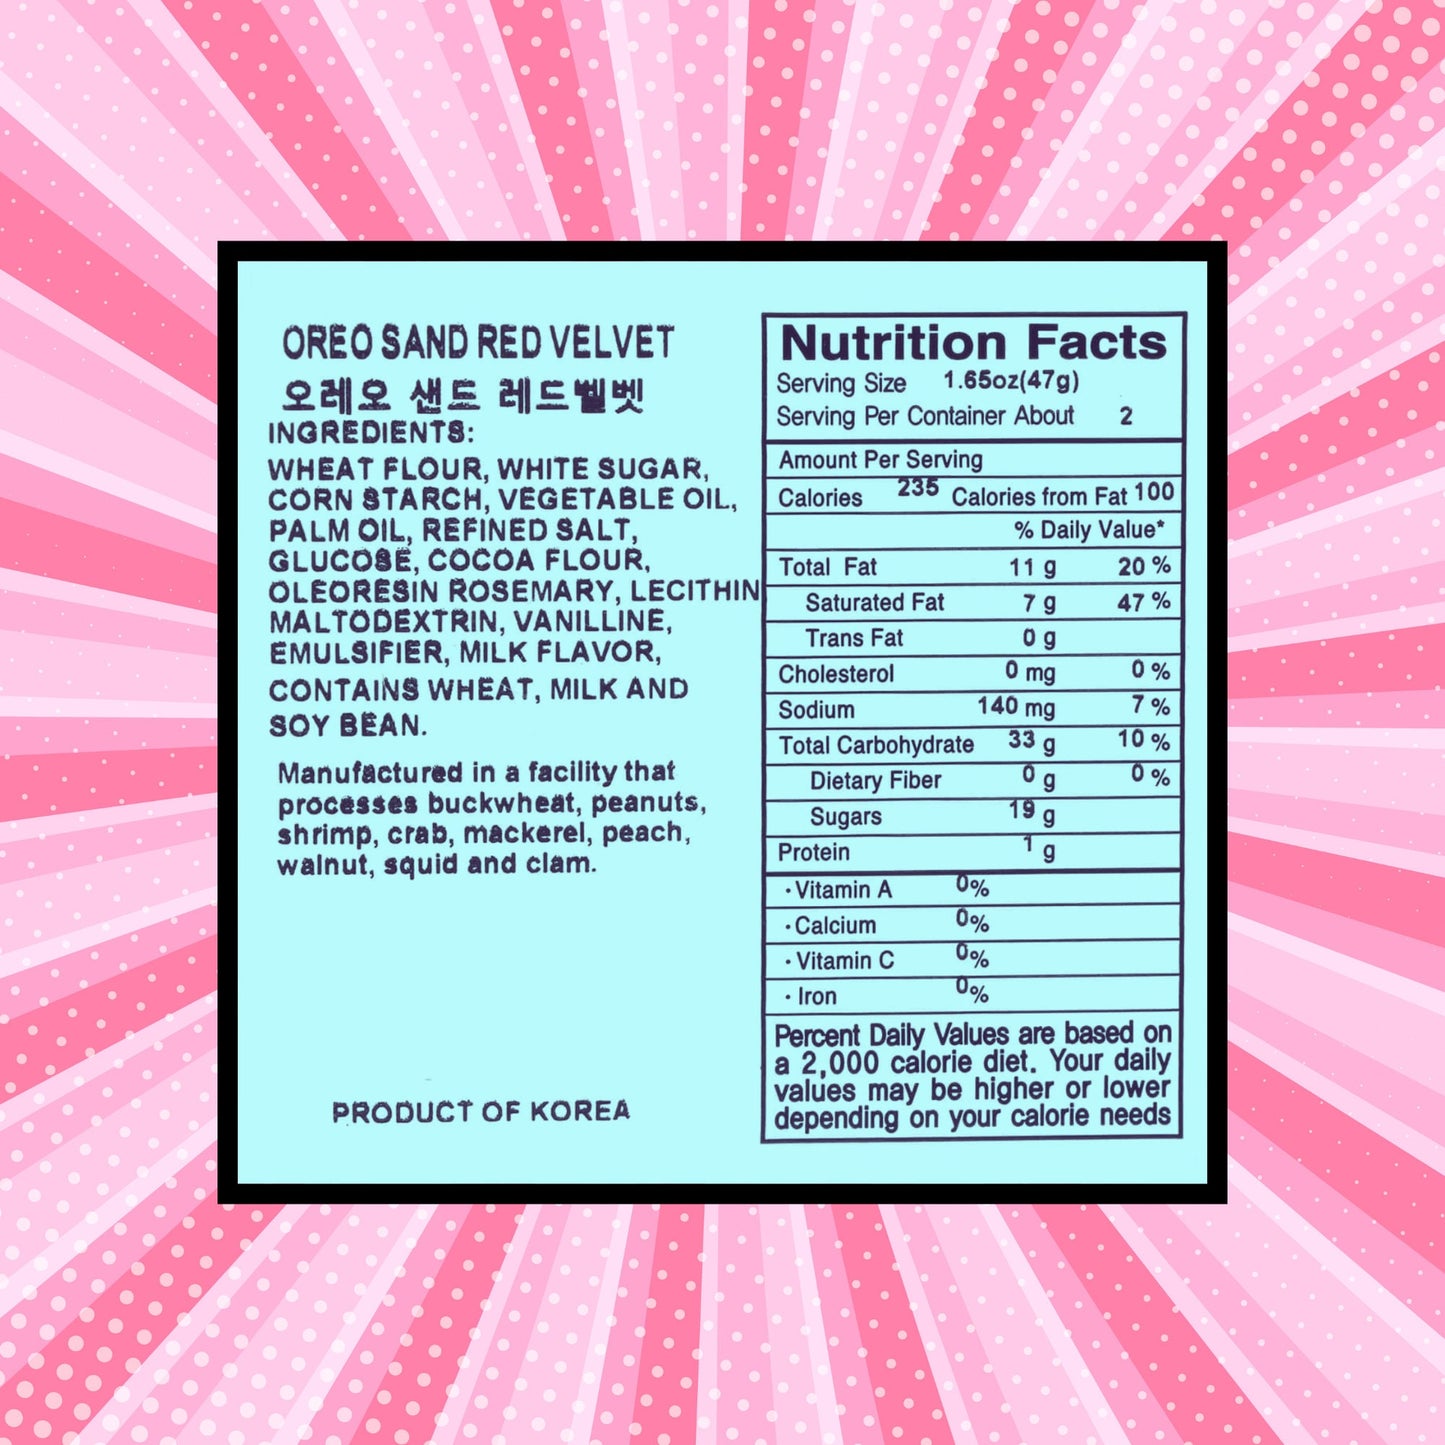 Korean Oreos - Red Velvet Flavor (Ingredients with Nutrition Facts)